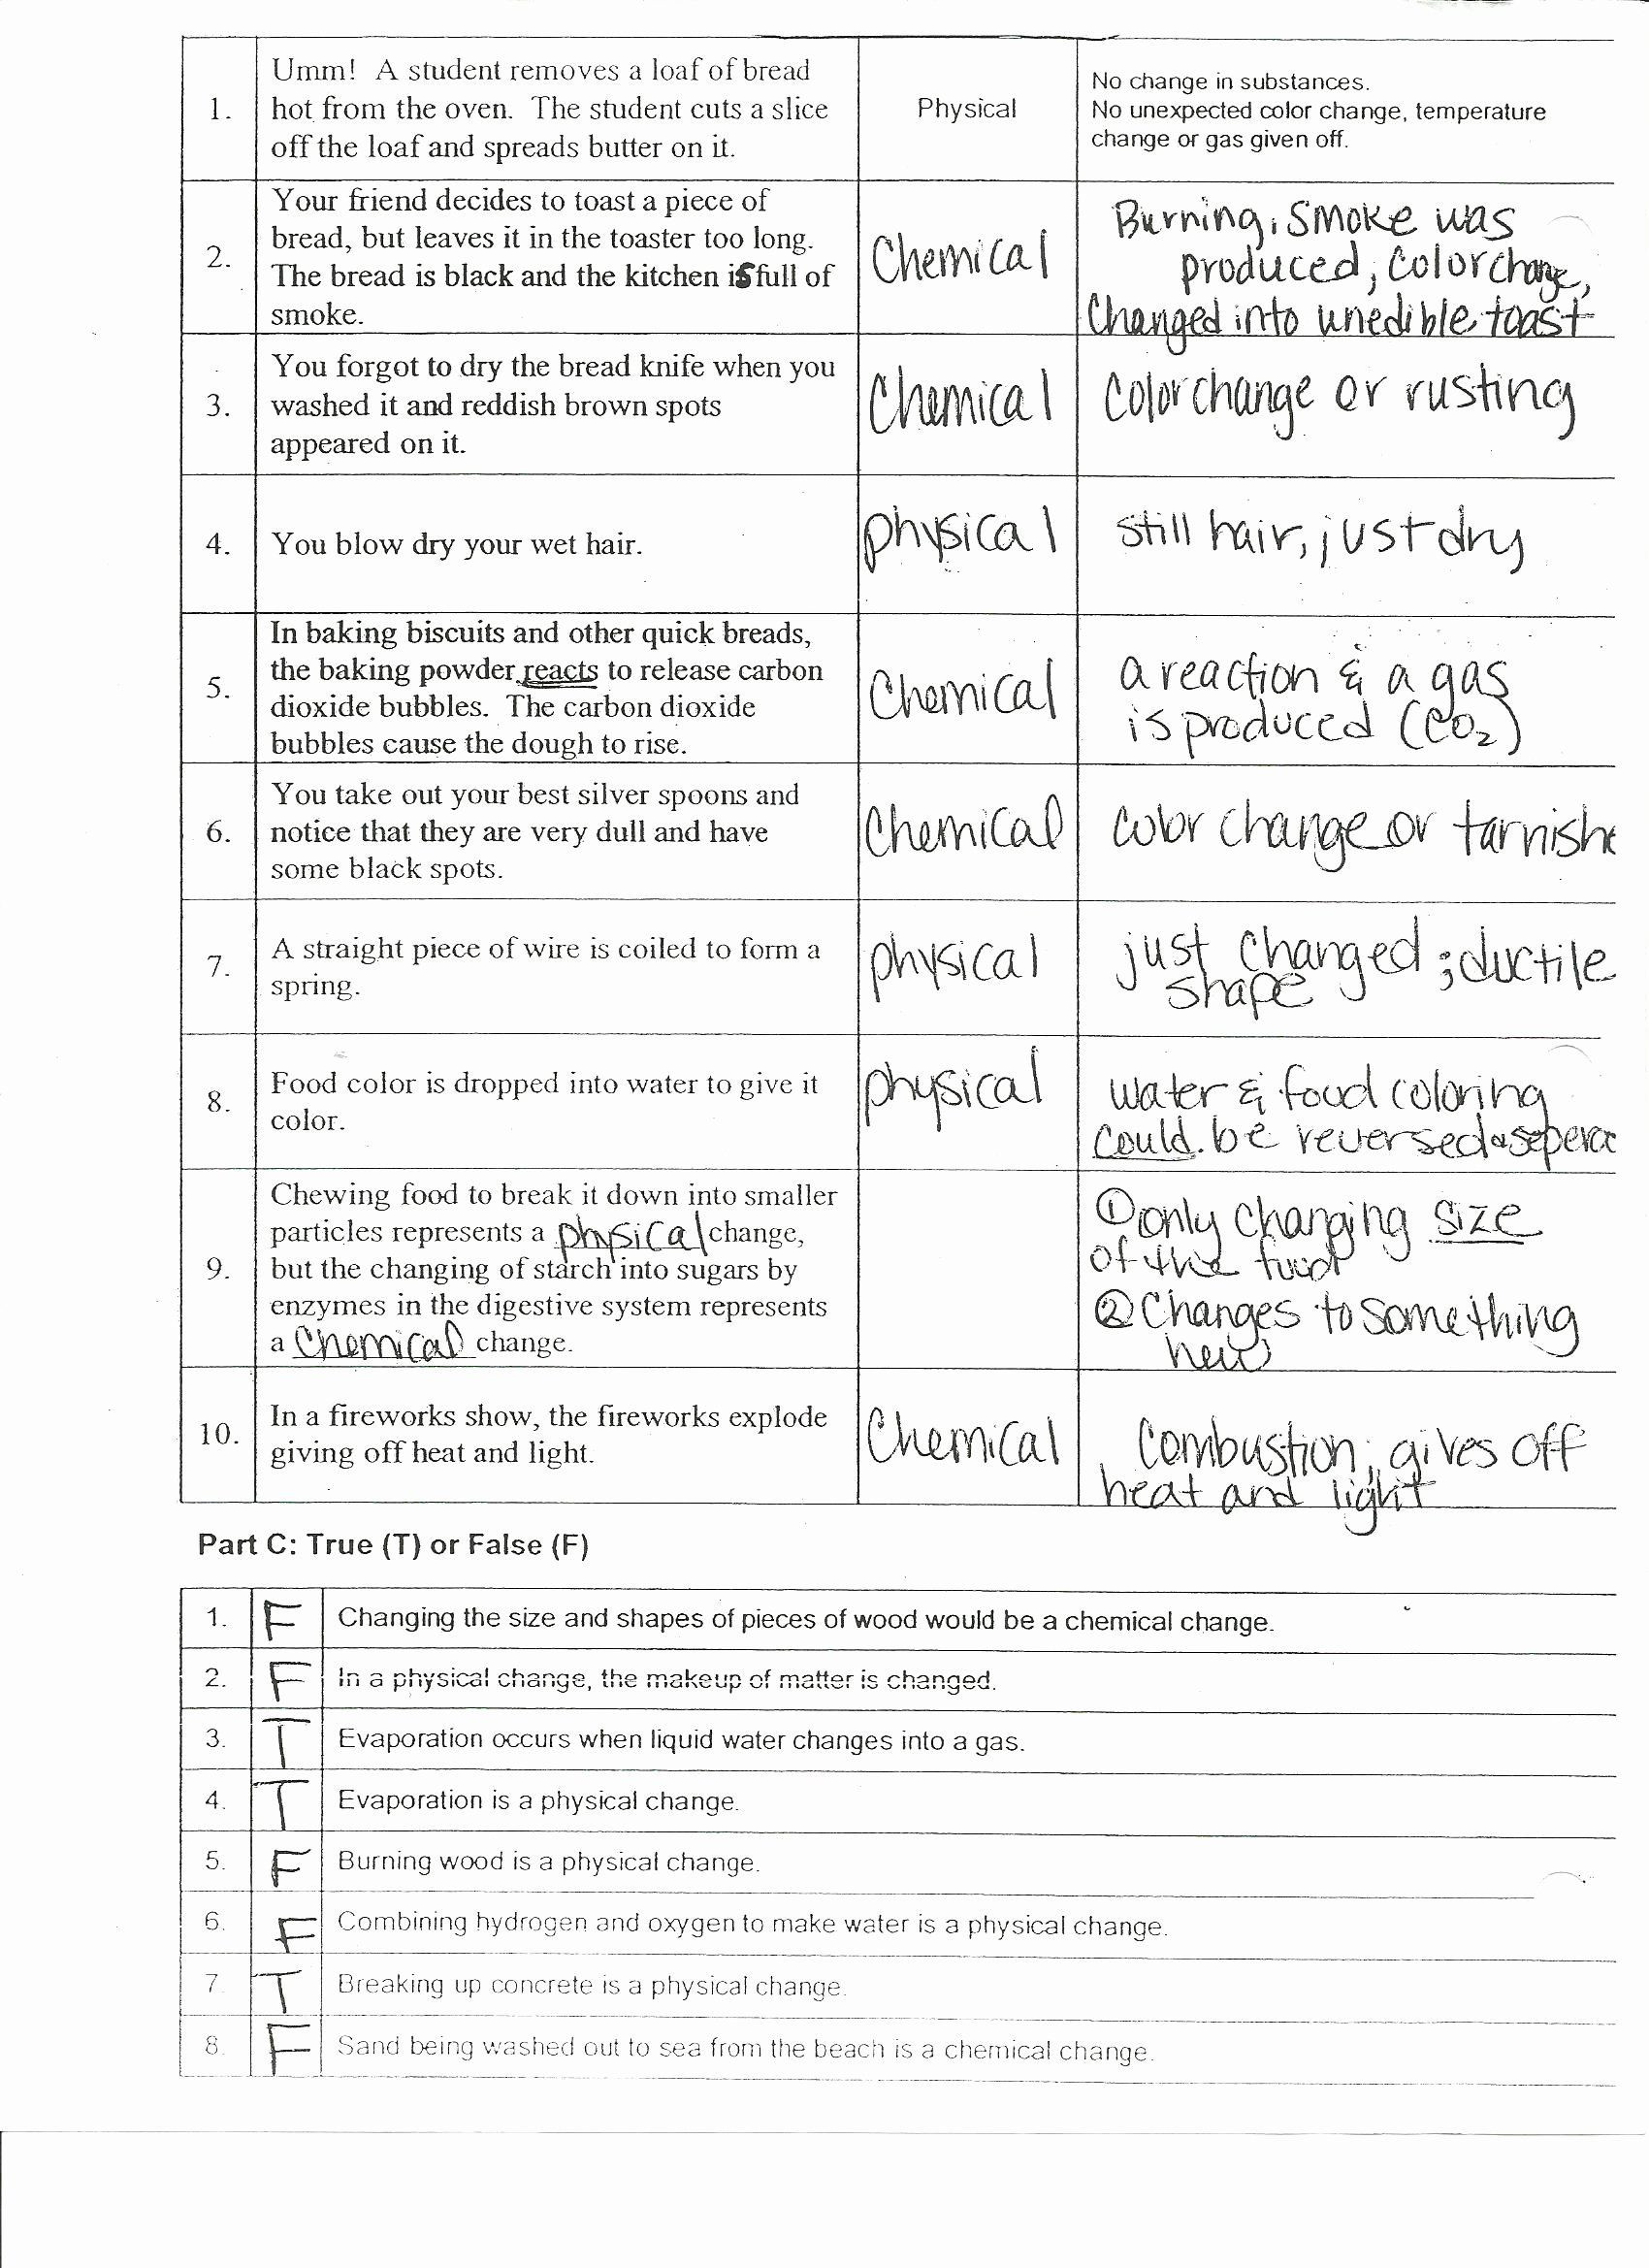 Physical and Chemical Changes Worksheet 50 Physical and Chemical Change Worksheet In 2020 with